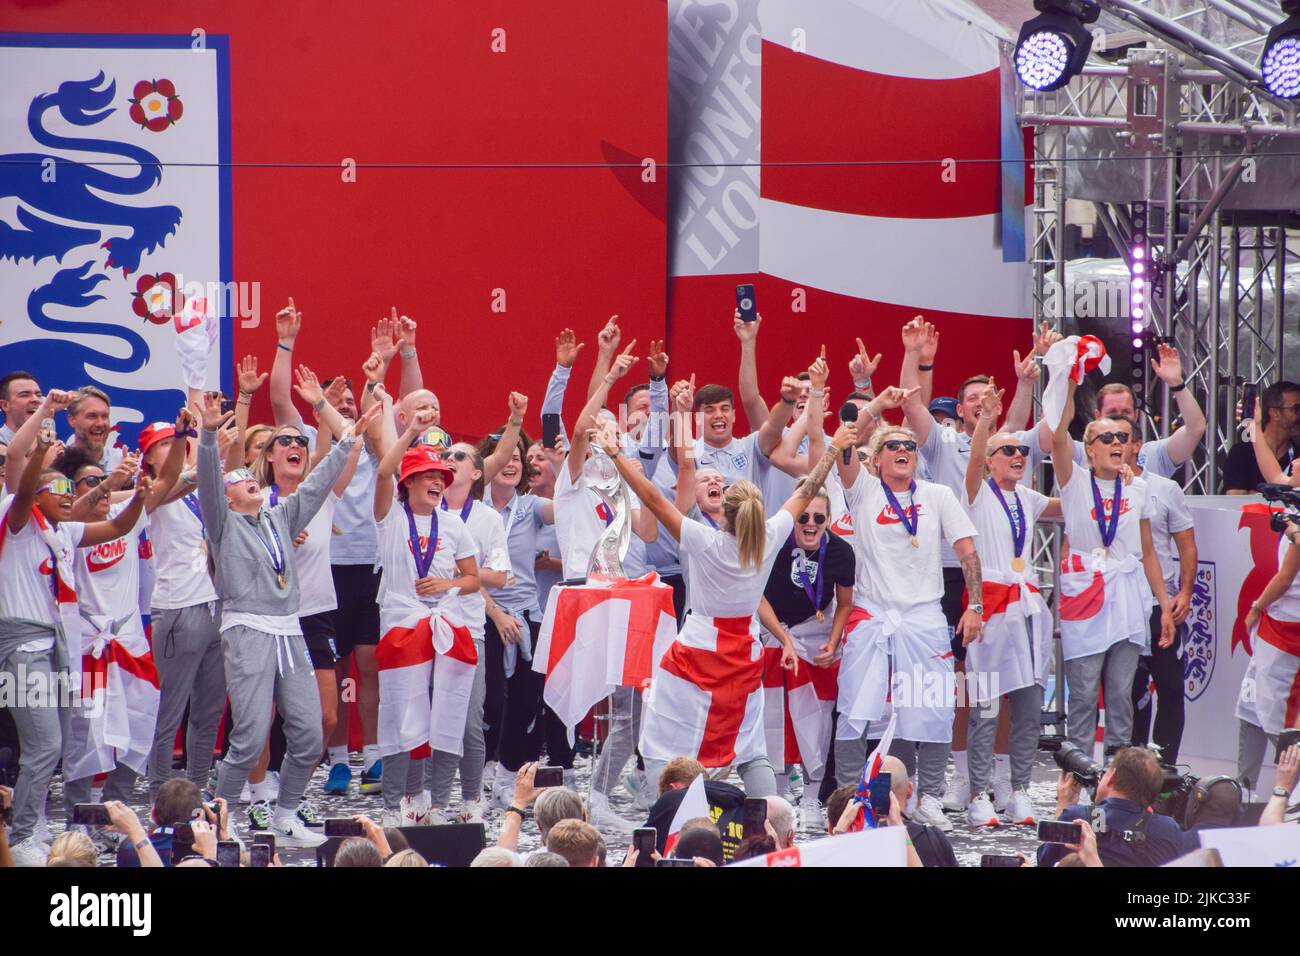 London, UK. 1st August 2022. The Lionesses on stage. Thousands of people gathered in Trafalgar Square to celebrate the England team - the Lionesses -  winning Women's Euro 2022 football tournament. Credit: Vuk Valcic/Alamy Live News Stock Photo